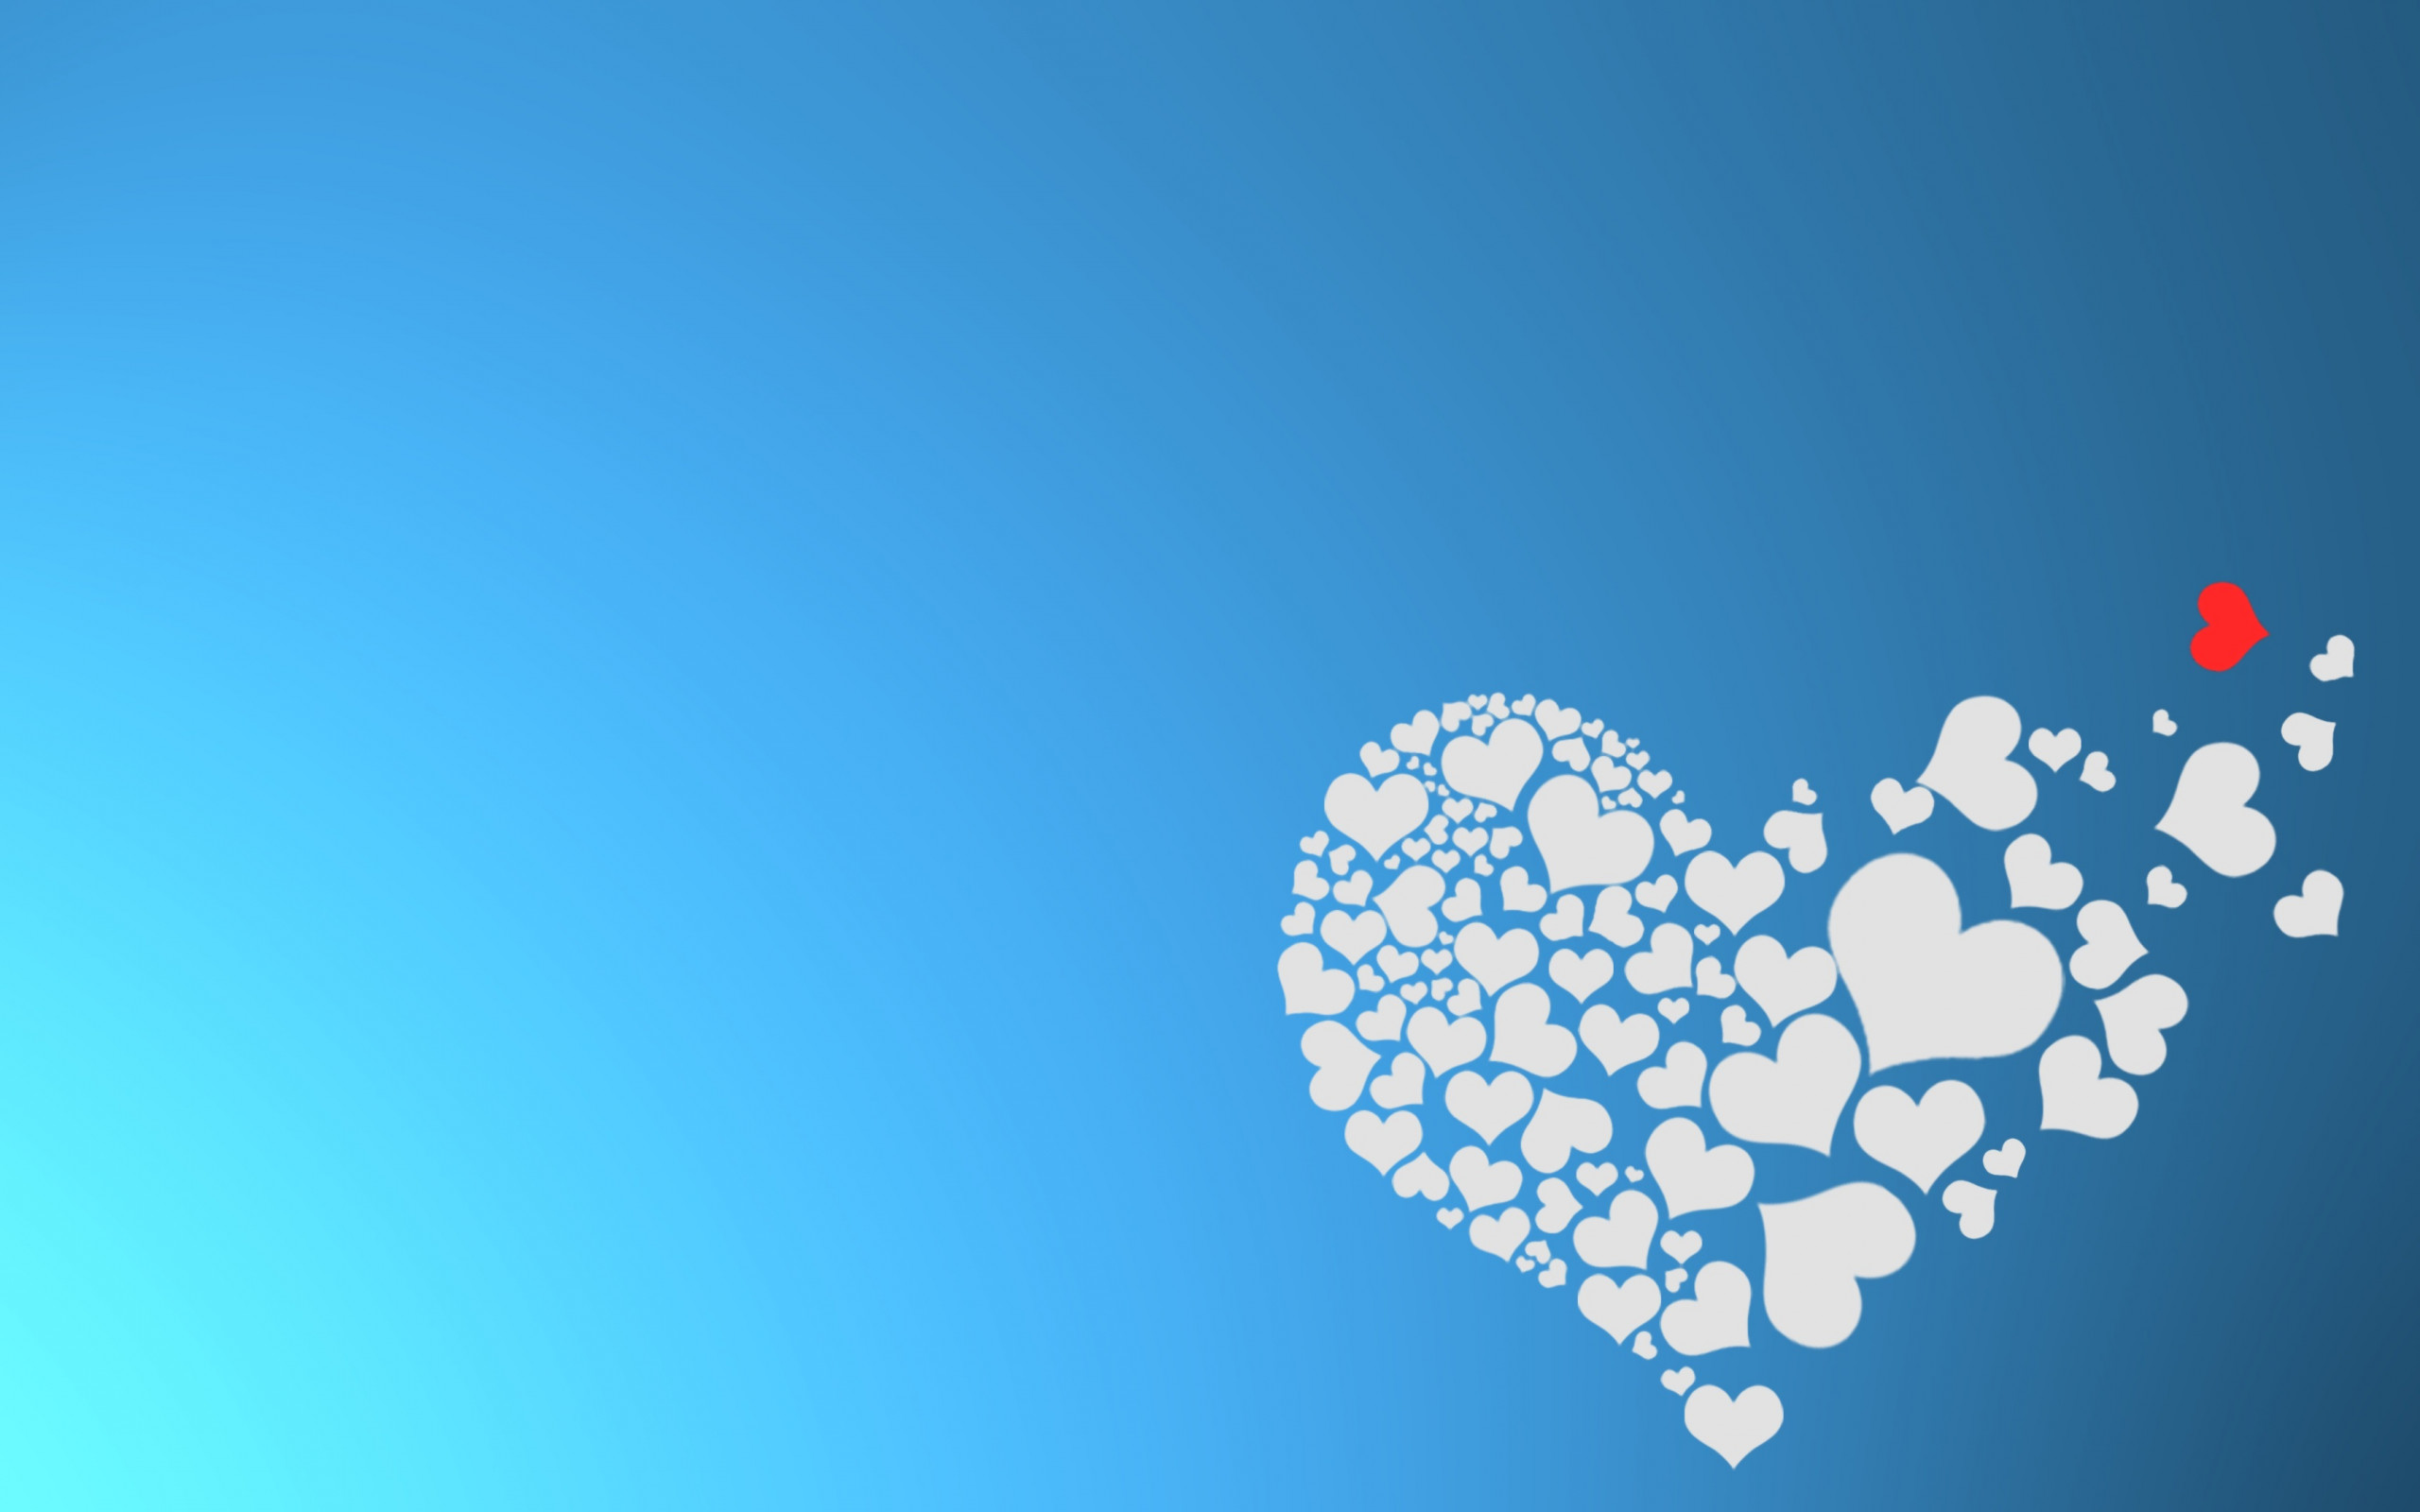 The hearts of love wallpaper 2560x1600